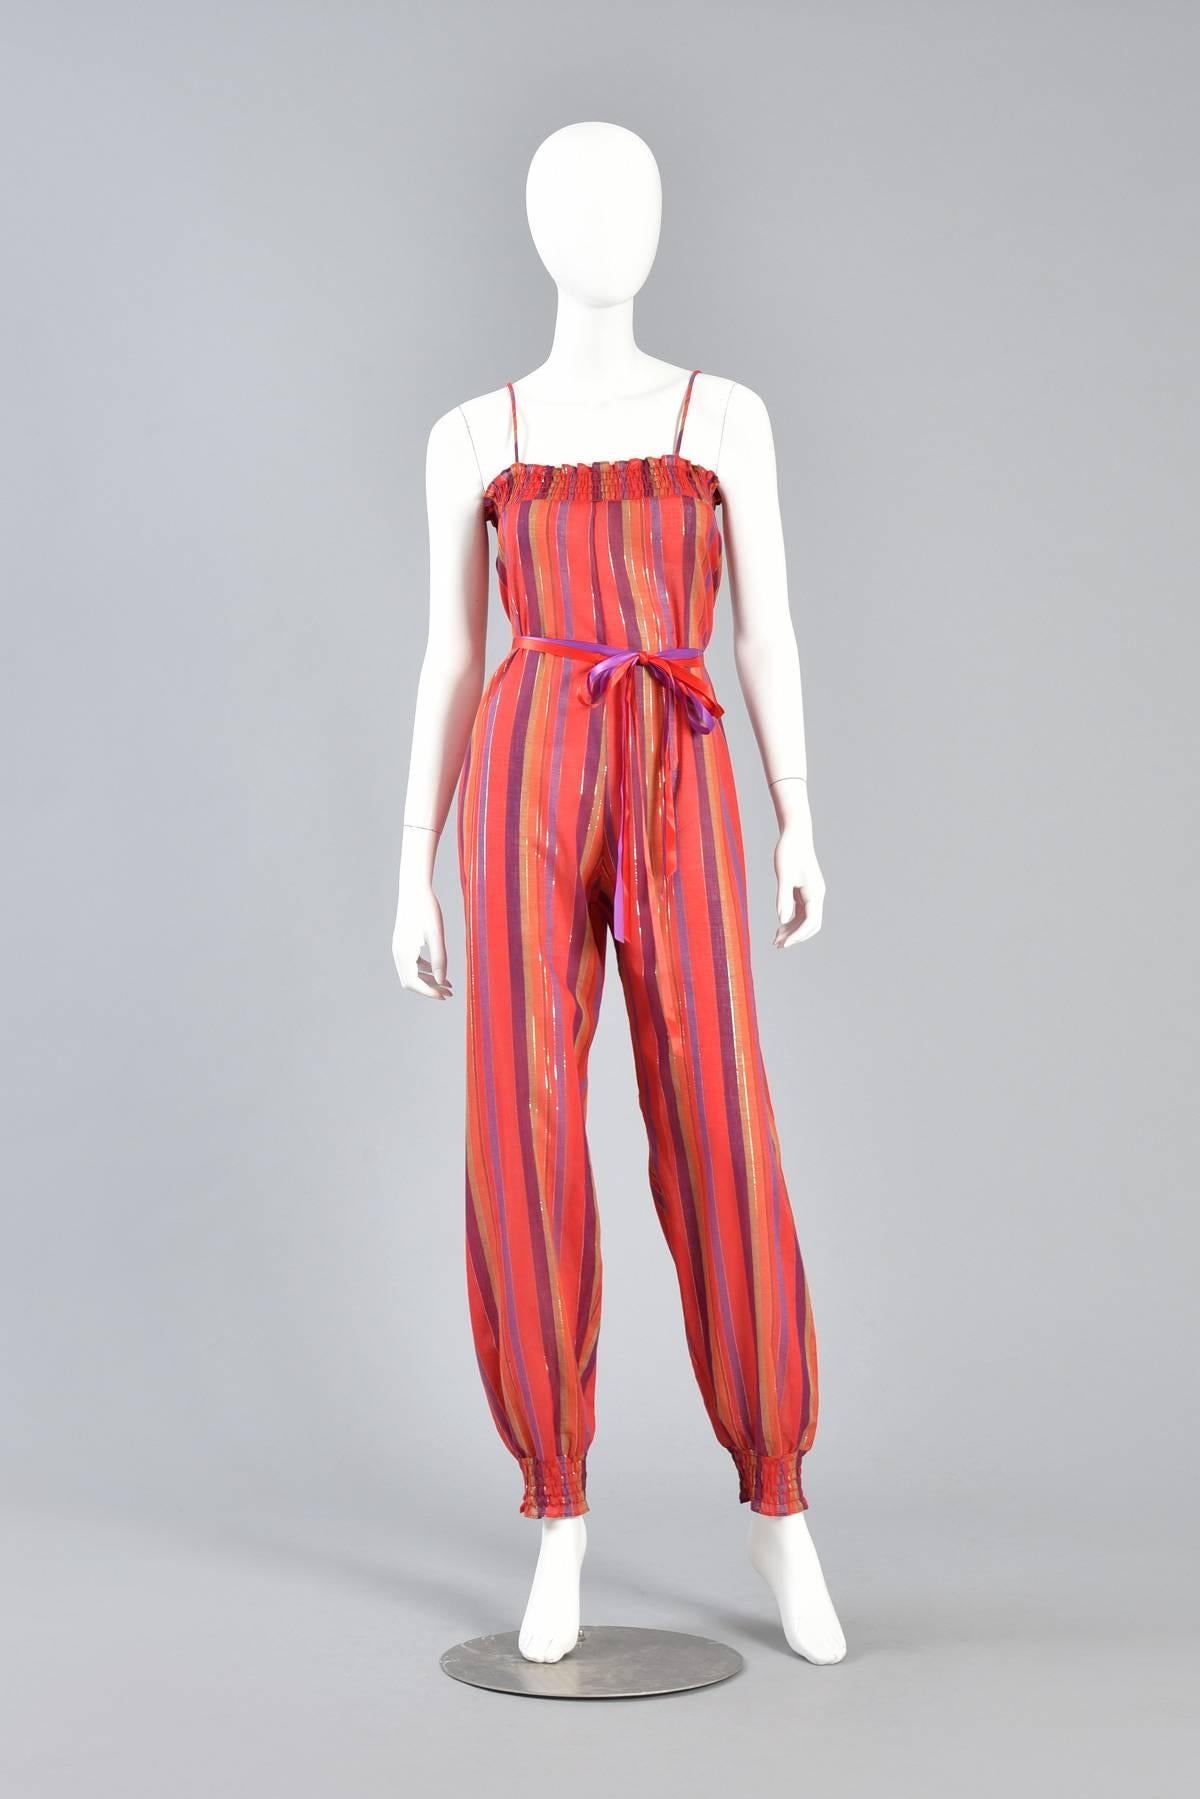 1970s Ethnic Stripe Cotton Gauze Jumpsuit with Lurex Threads

Excellent vintage 1970s ethnic striped cotton jumpsuit. Coveted find! Lightweight semi sheer cotton gauze body with red, purple, gold & orange stripes accented by silver and gold lurex